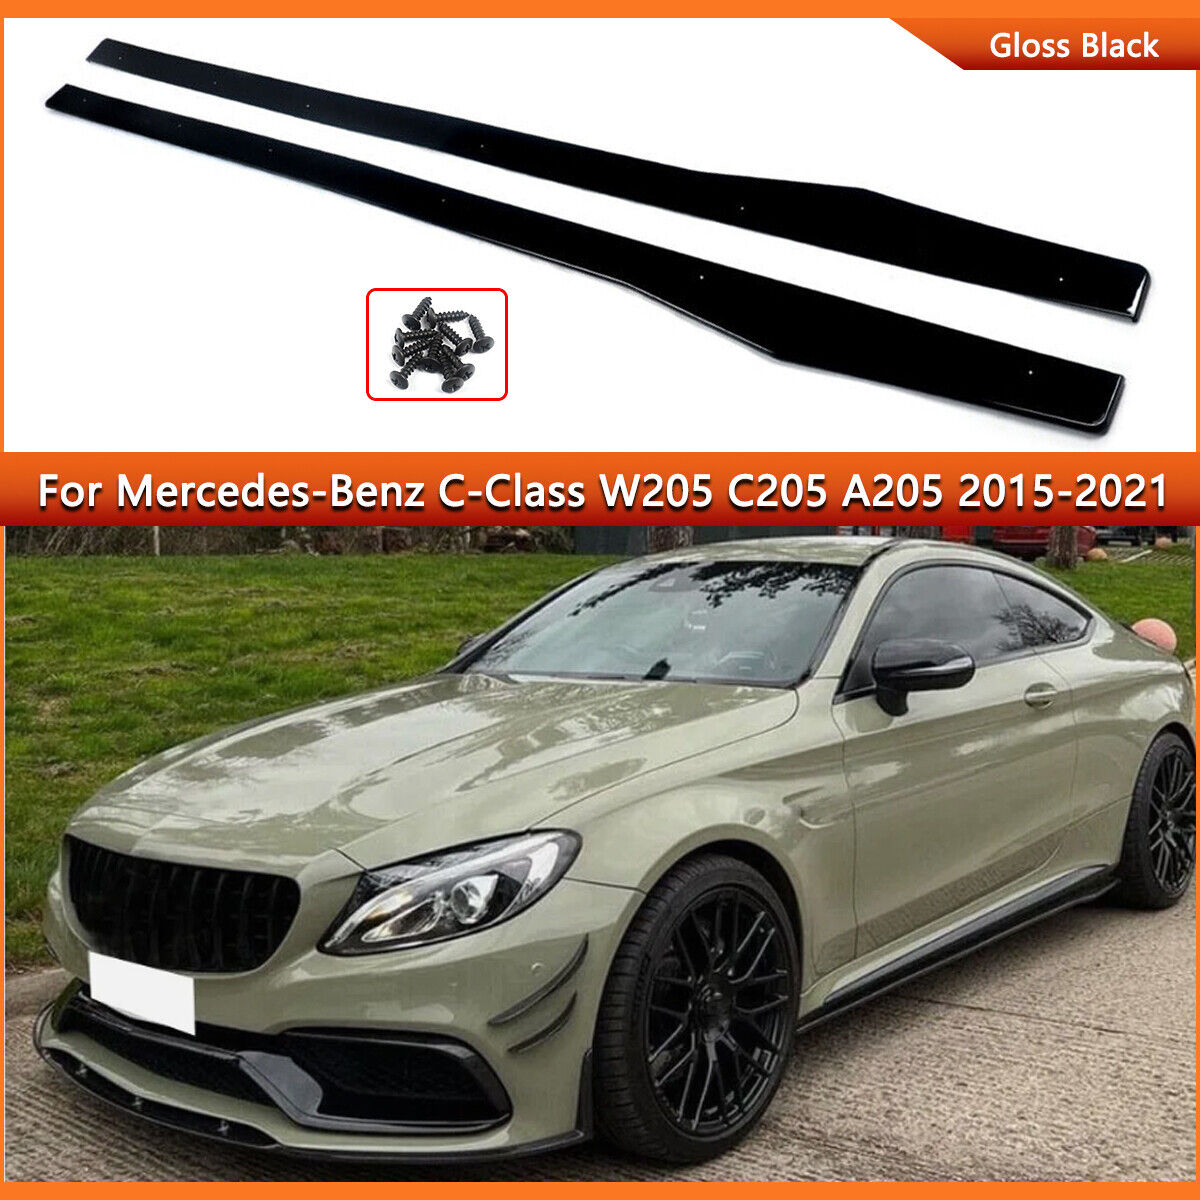 For 2015-21 Mercedes W205 C205 C43 C63 AMG Gloss Black Side Skirts Extension Lip